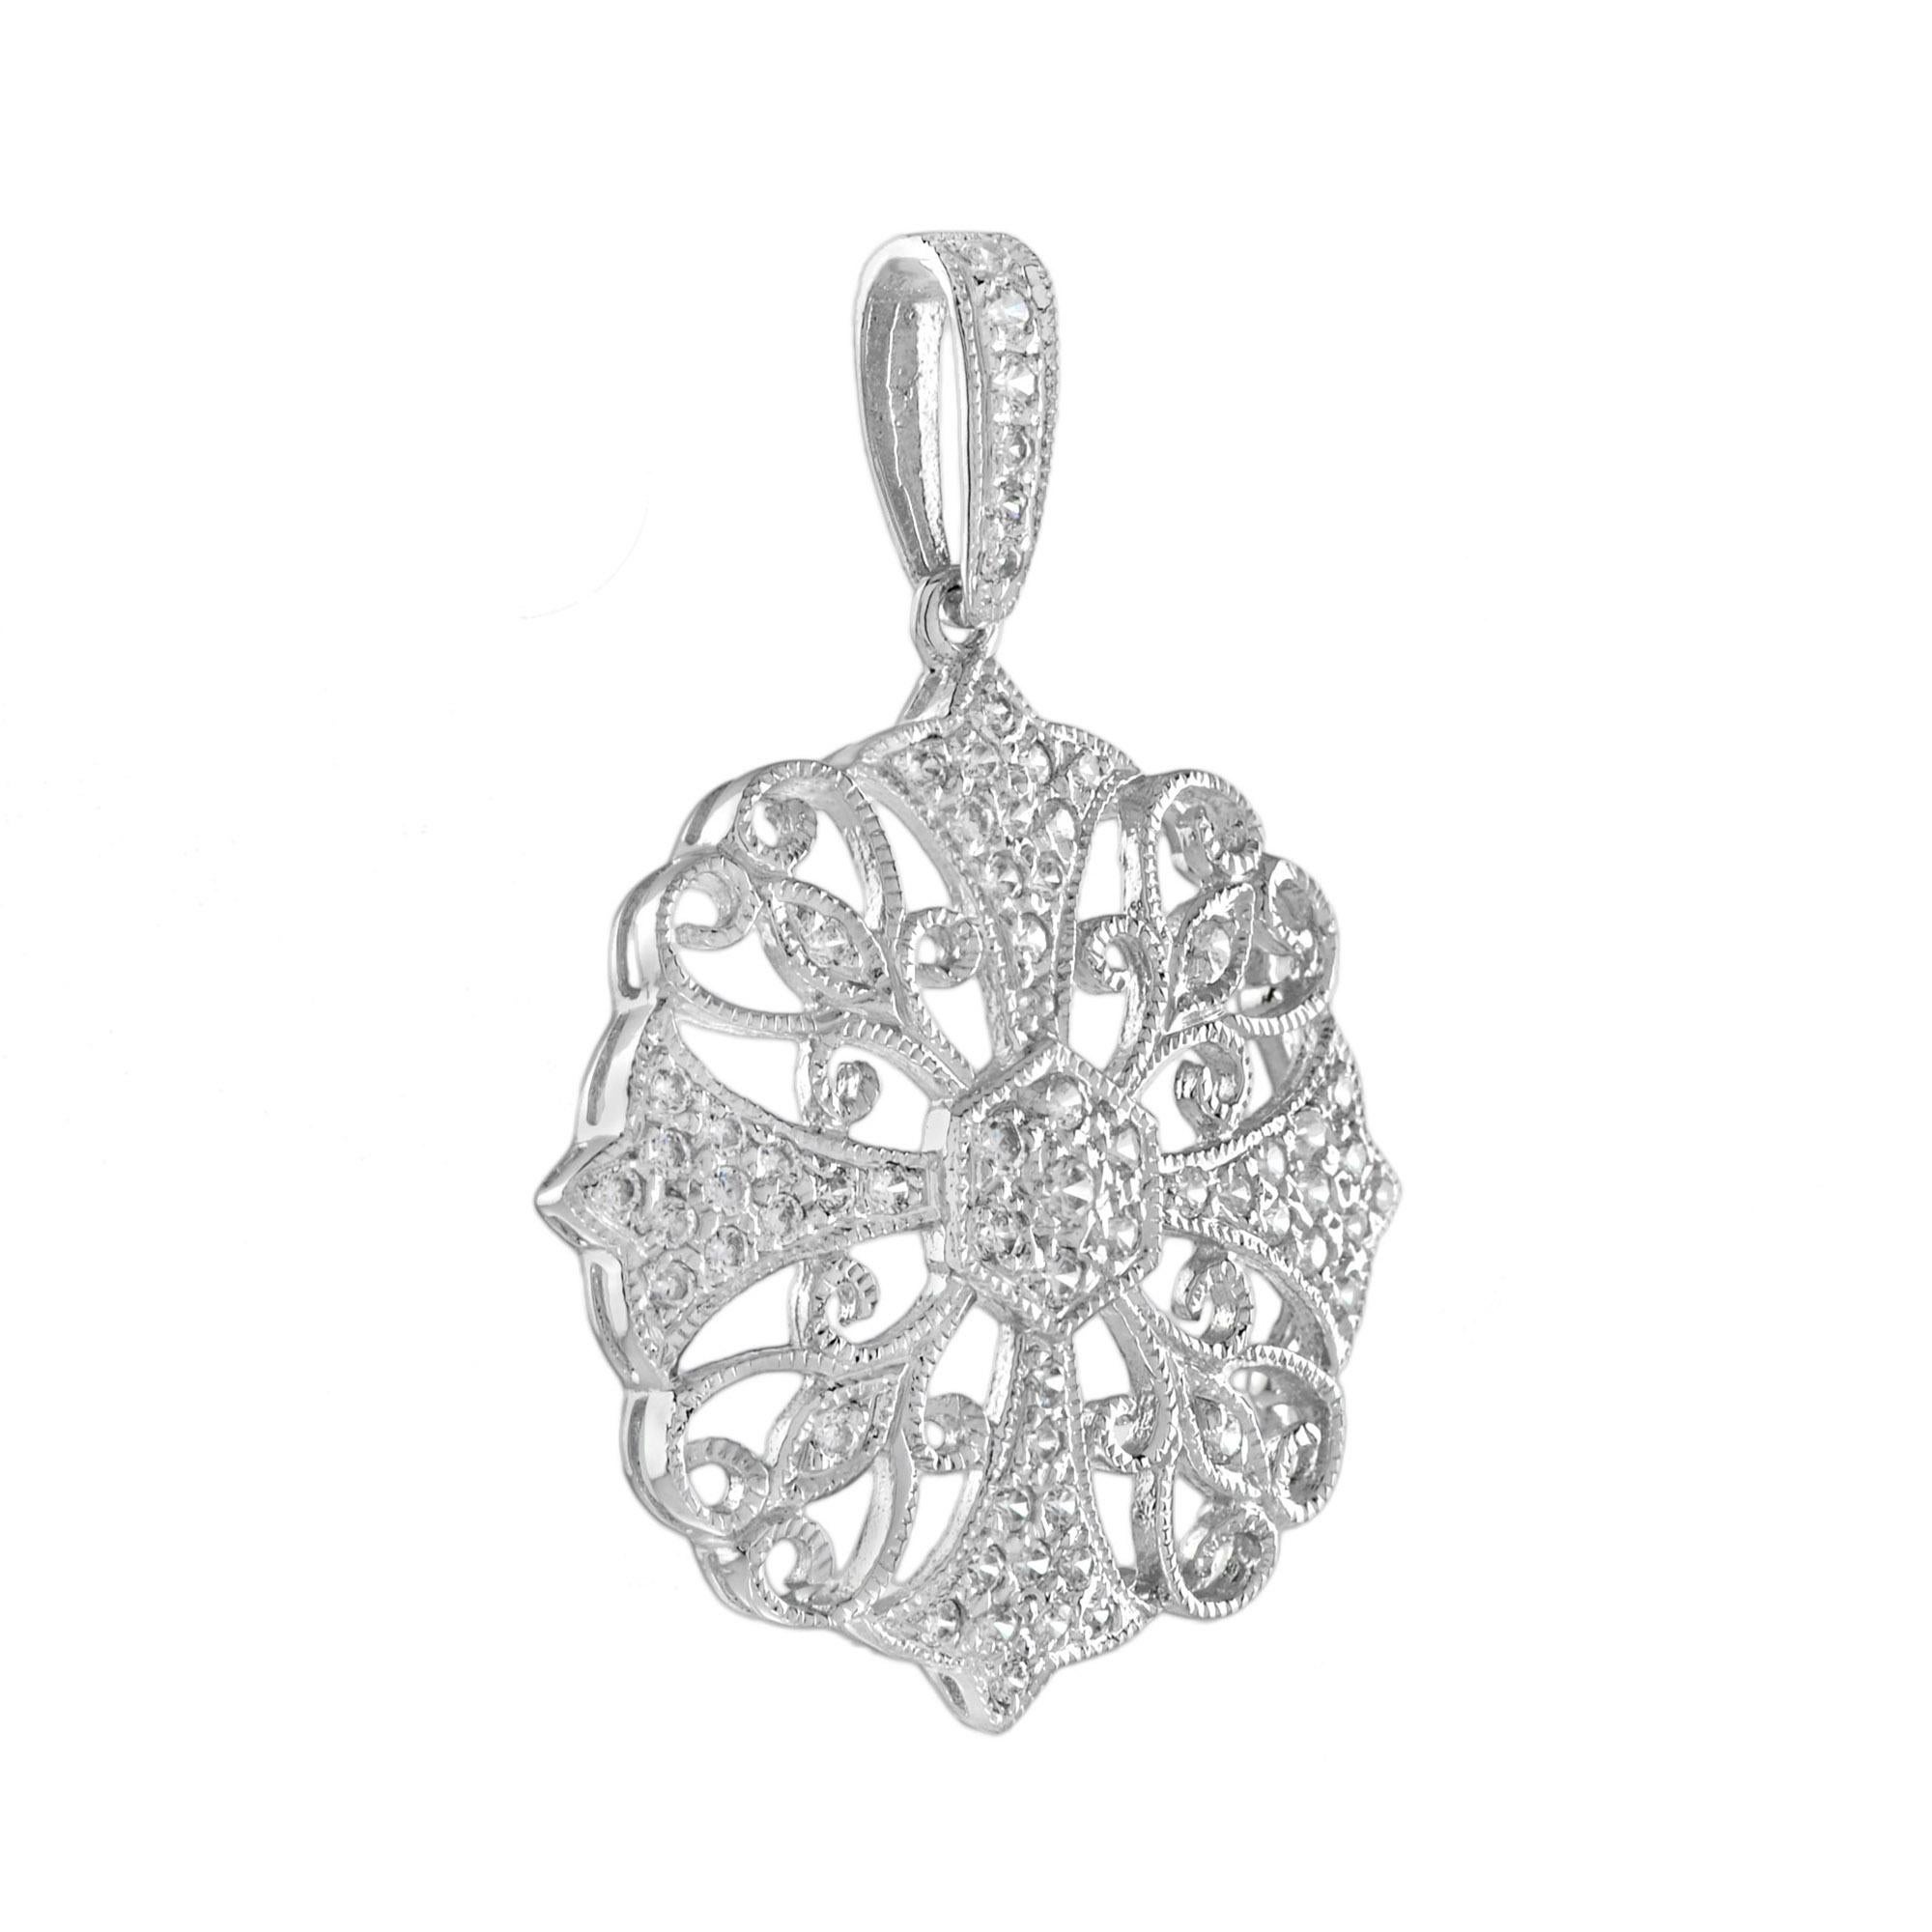 Add the perfect touch to your look with the Fleur Filigree Flower Pendant. An instant eye-catcher, it sports a lovely pendant with intricate details that instantly upgrade any outfit. The diamonds in white gold setting adds a touch of elegance to